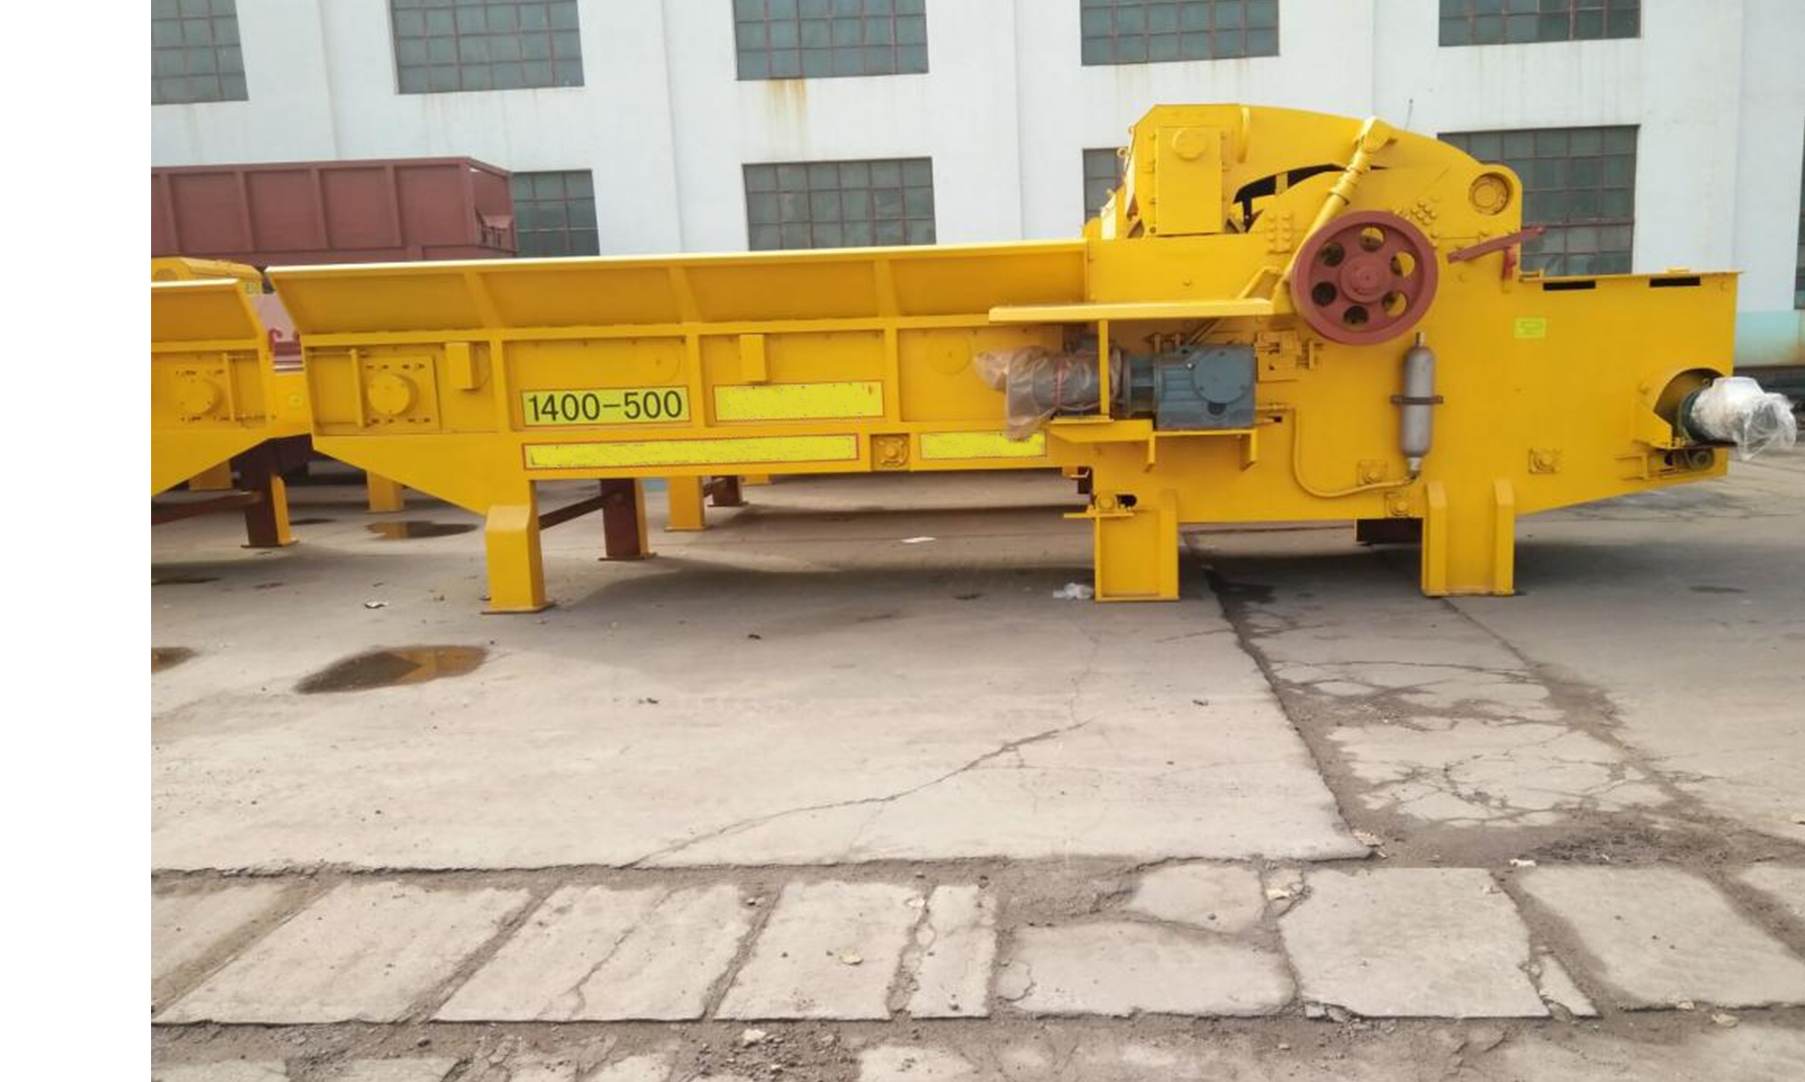 weiwei wood crusher can process 1.2m wide wood, new mobile wood crushing and pro